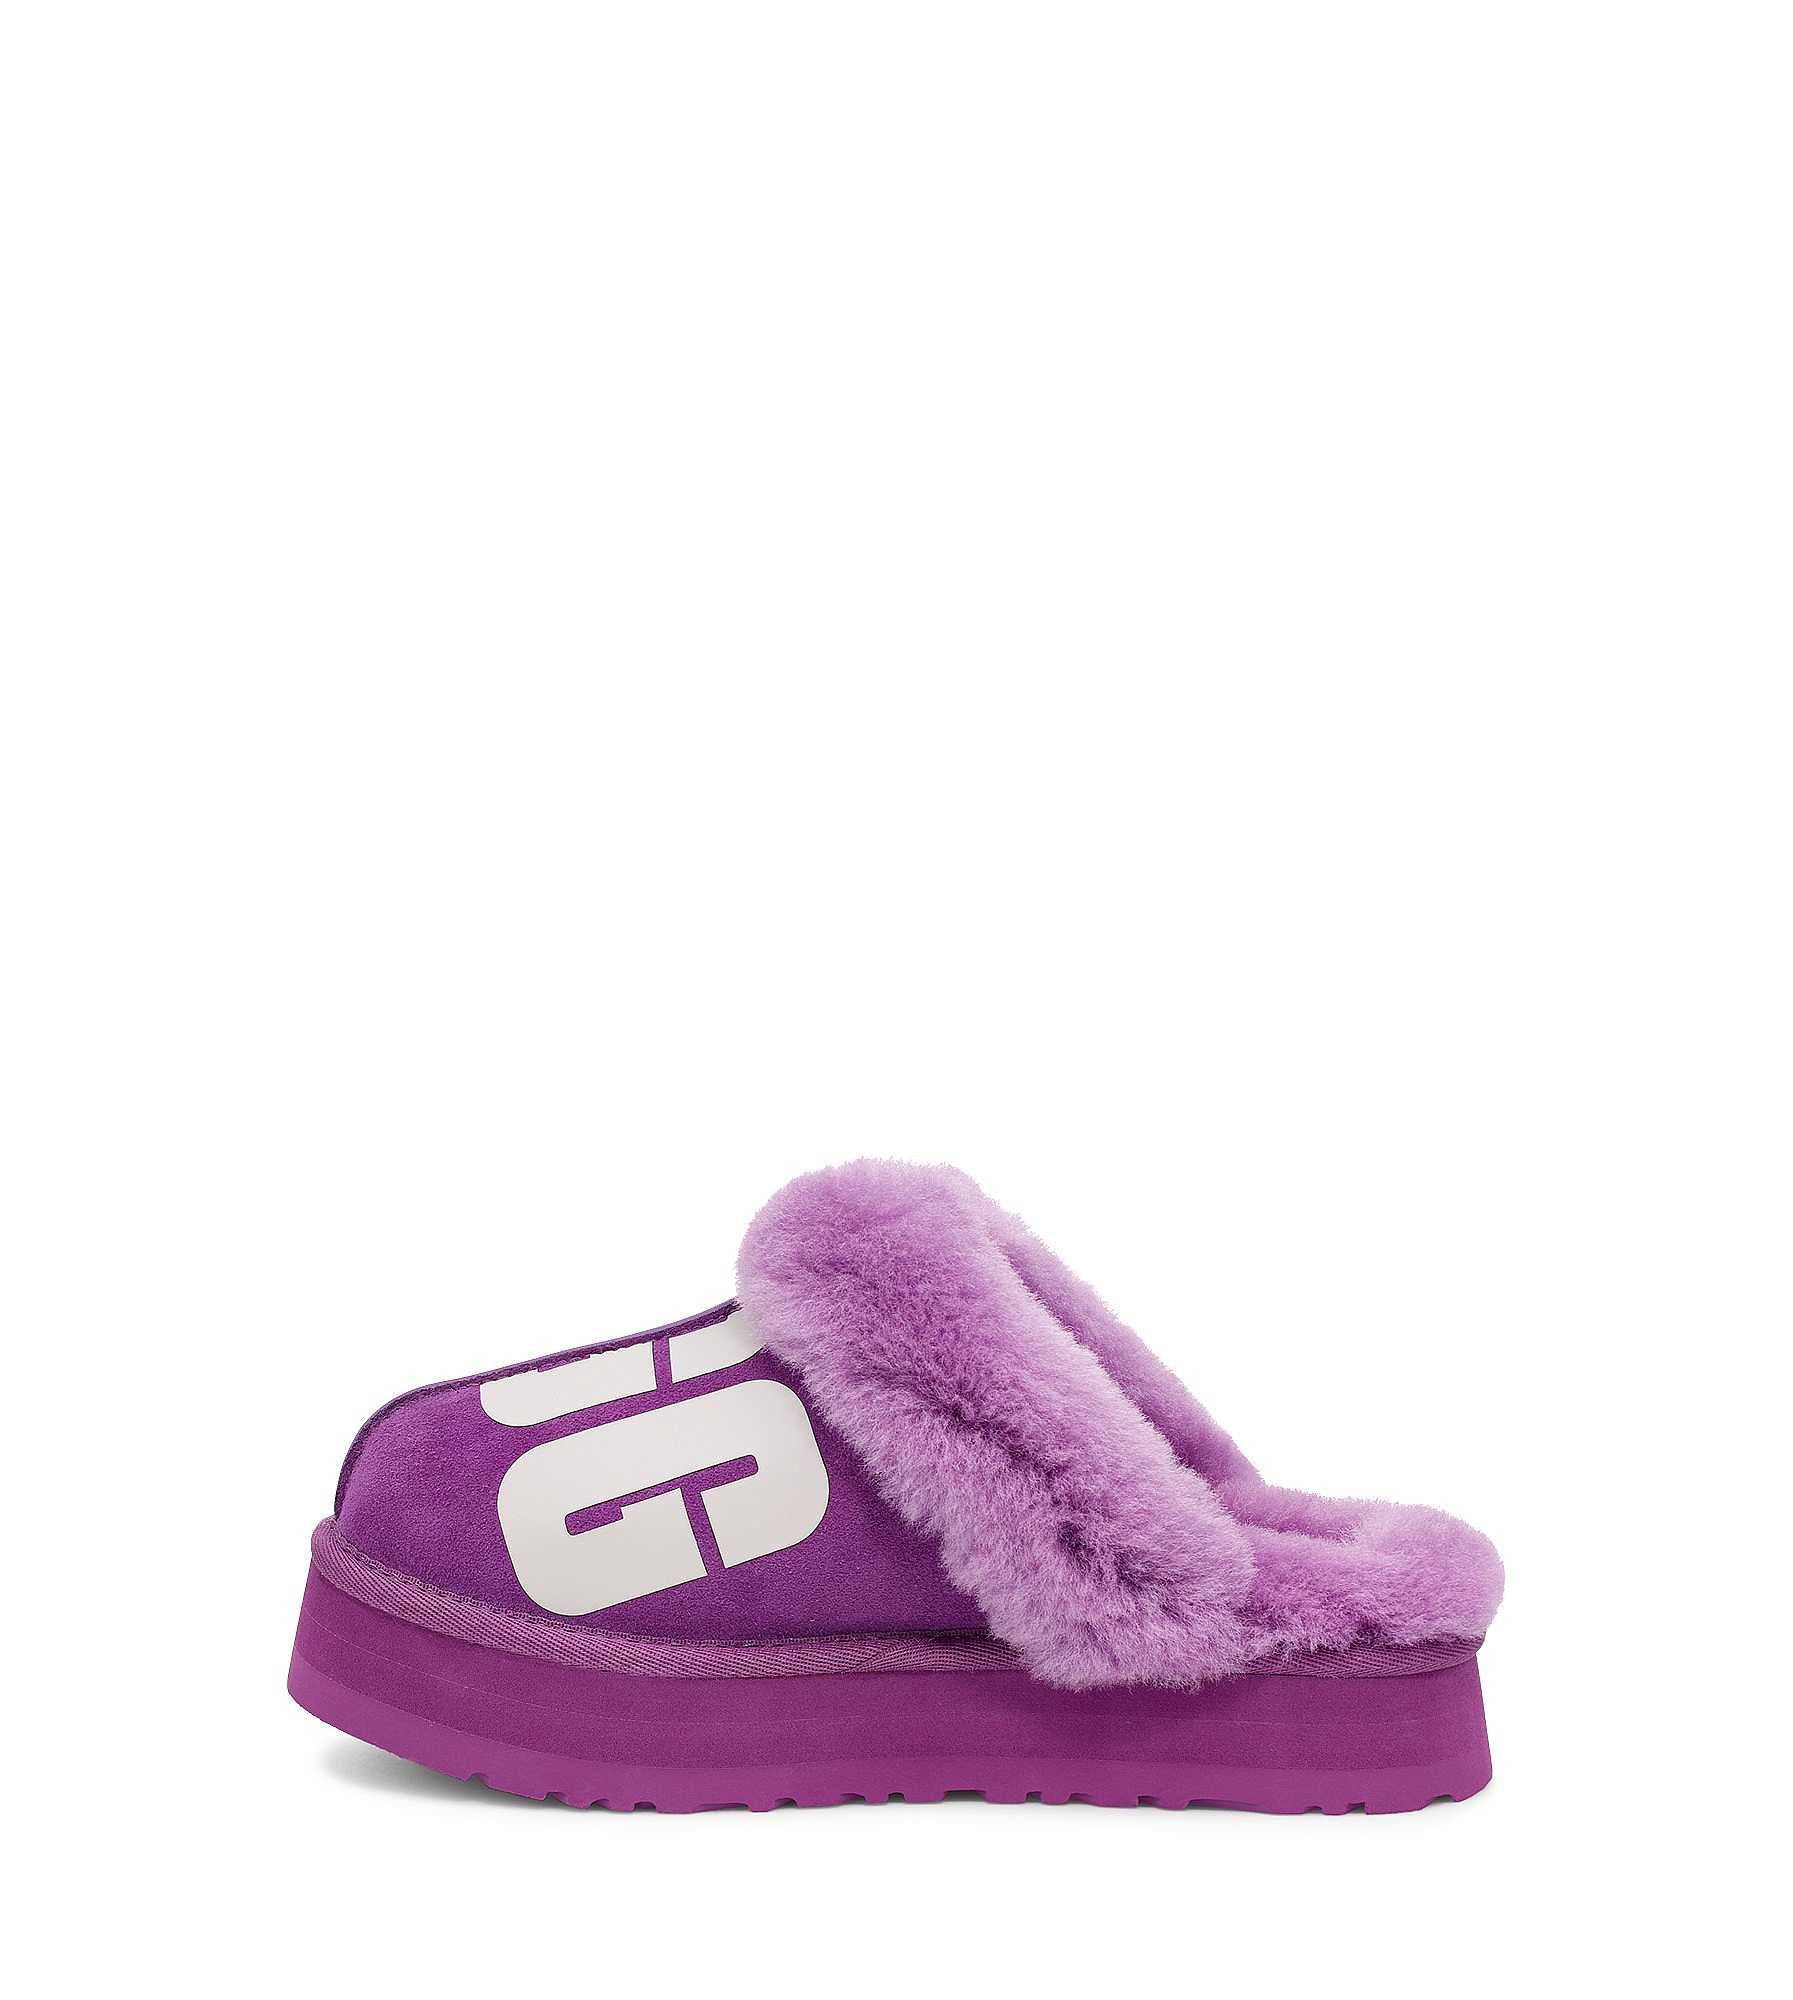 Disquette Chopd | UGG Store